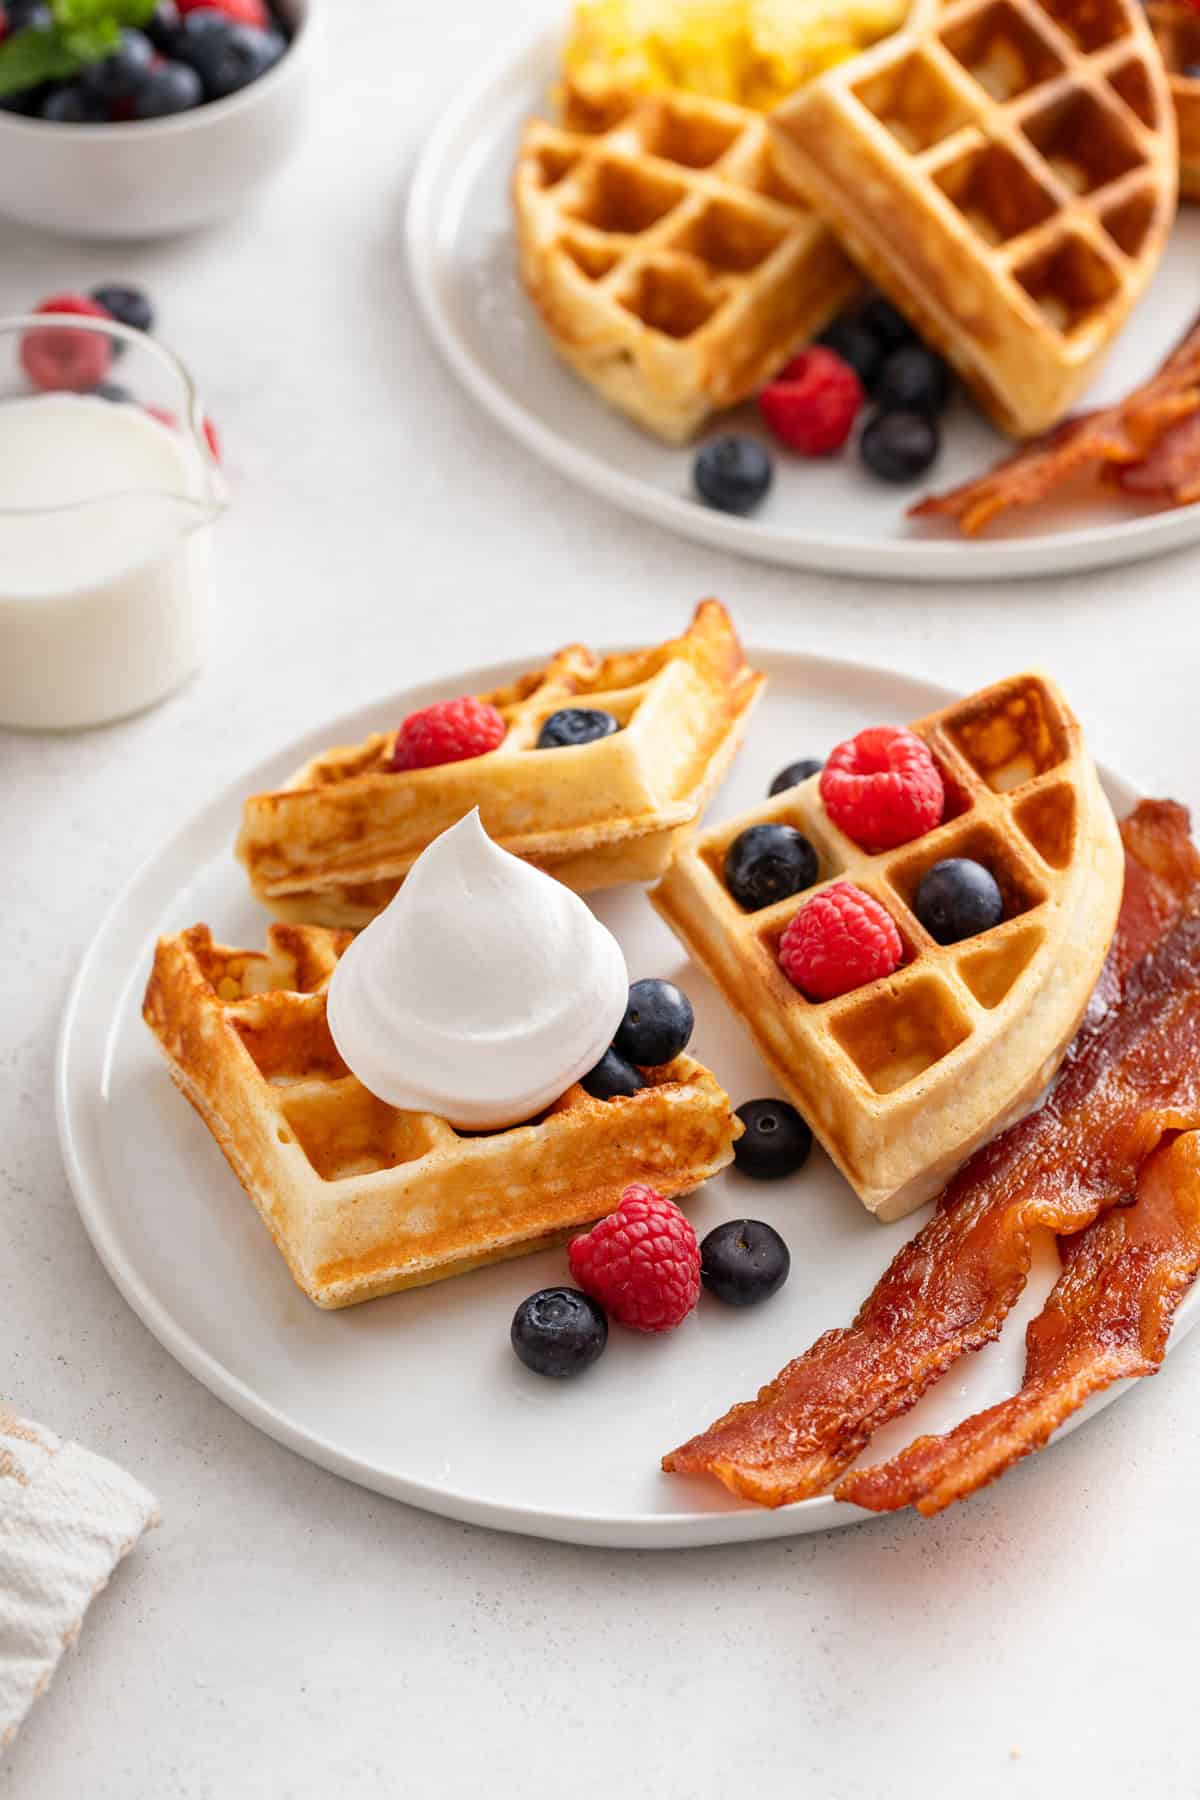 Dollop of whipped cream and fresh berries on a homemade waffle set next to bacon on a plate.